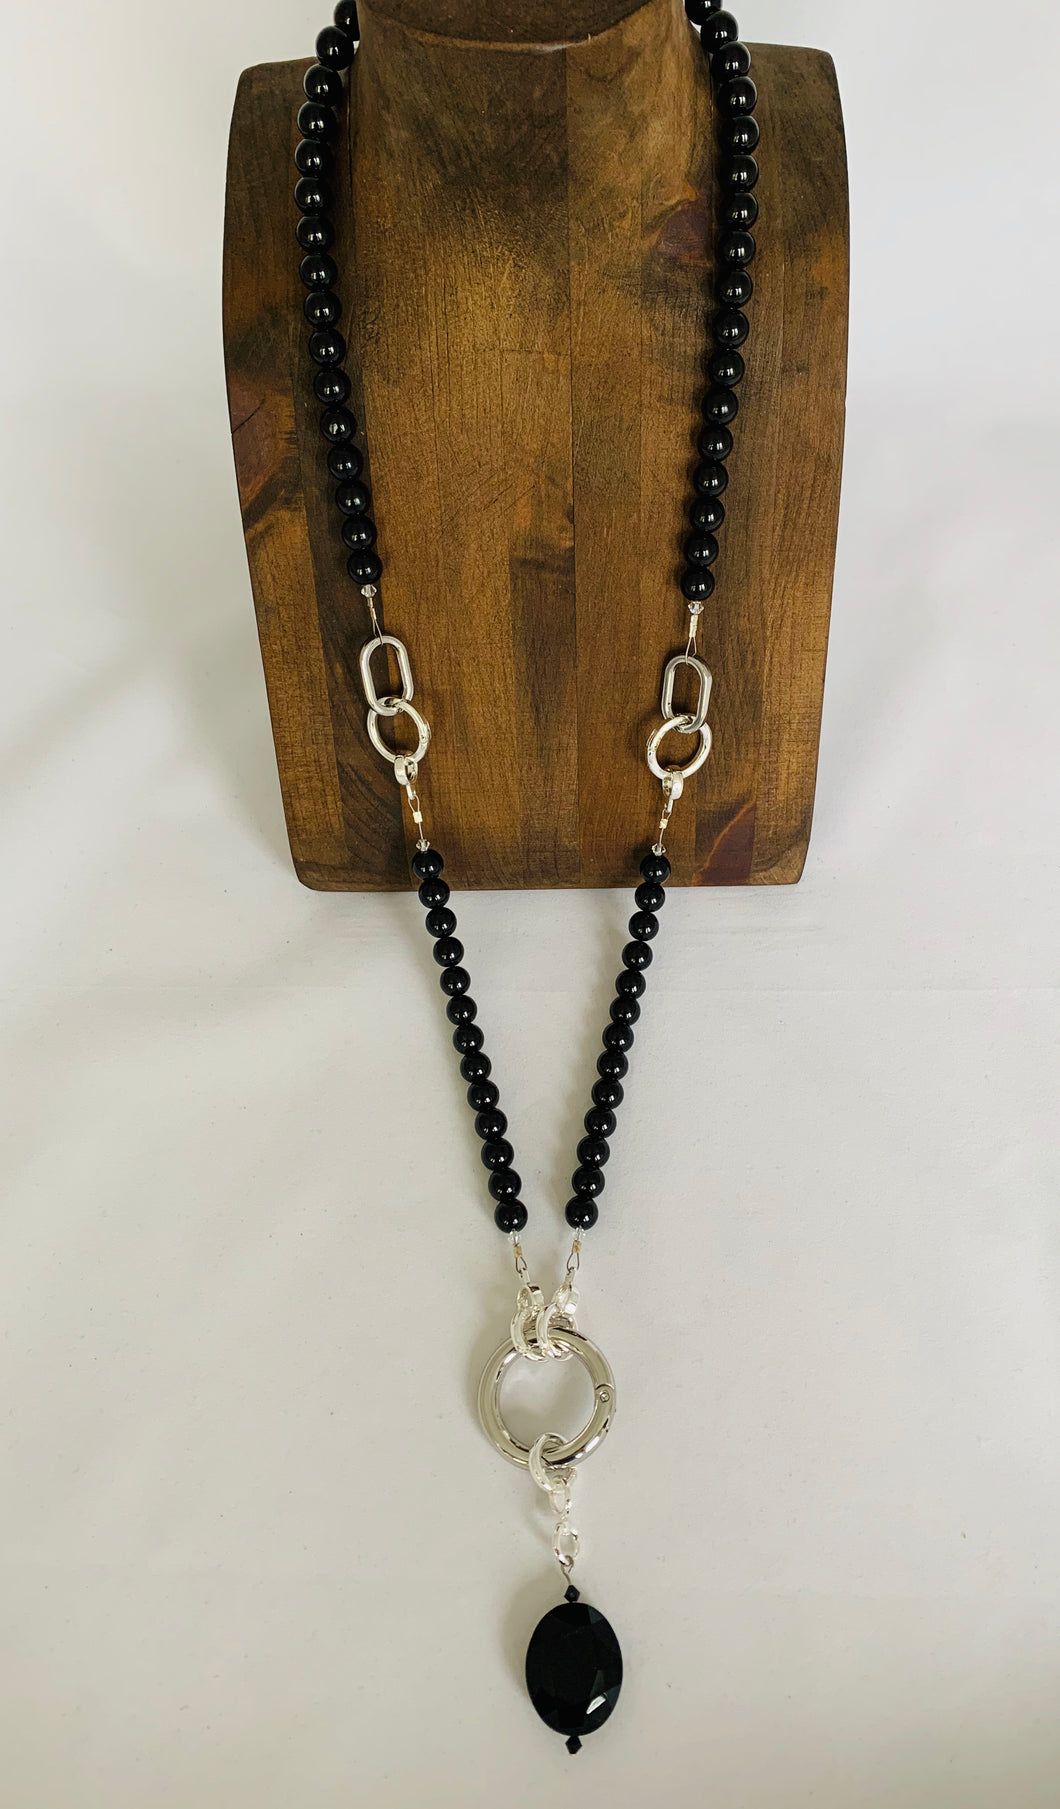 Faith Multiwear Necklace - Black and Silver